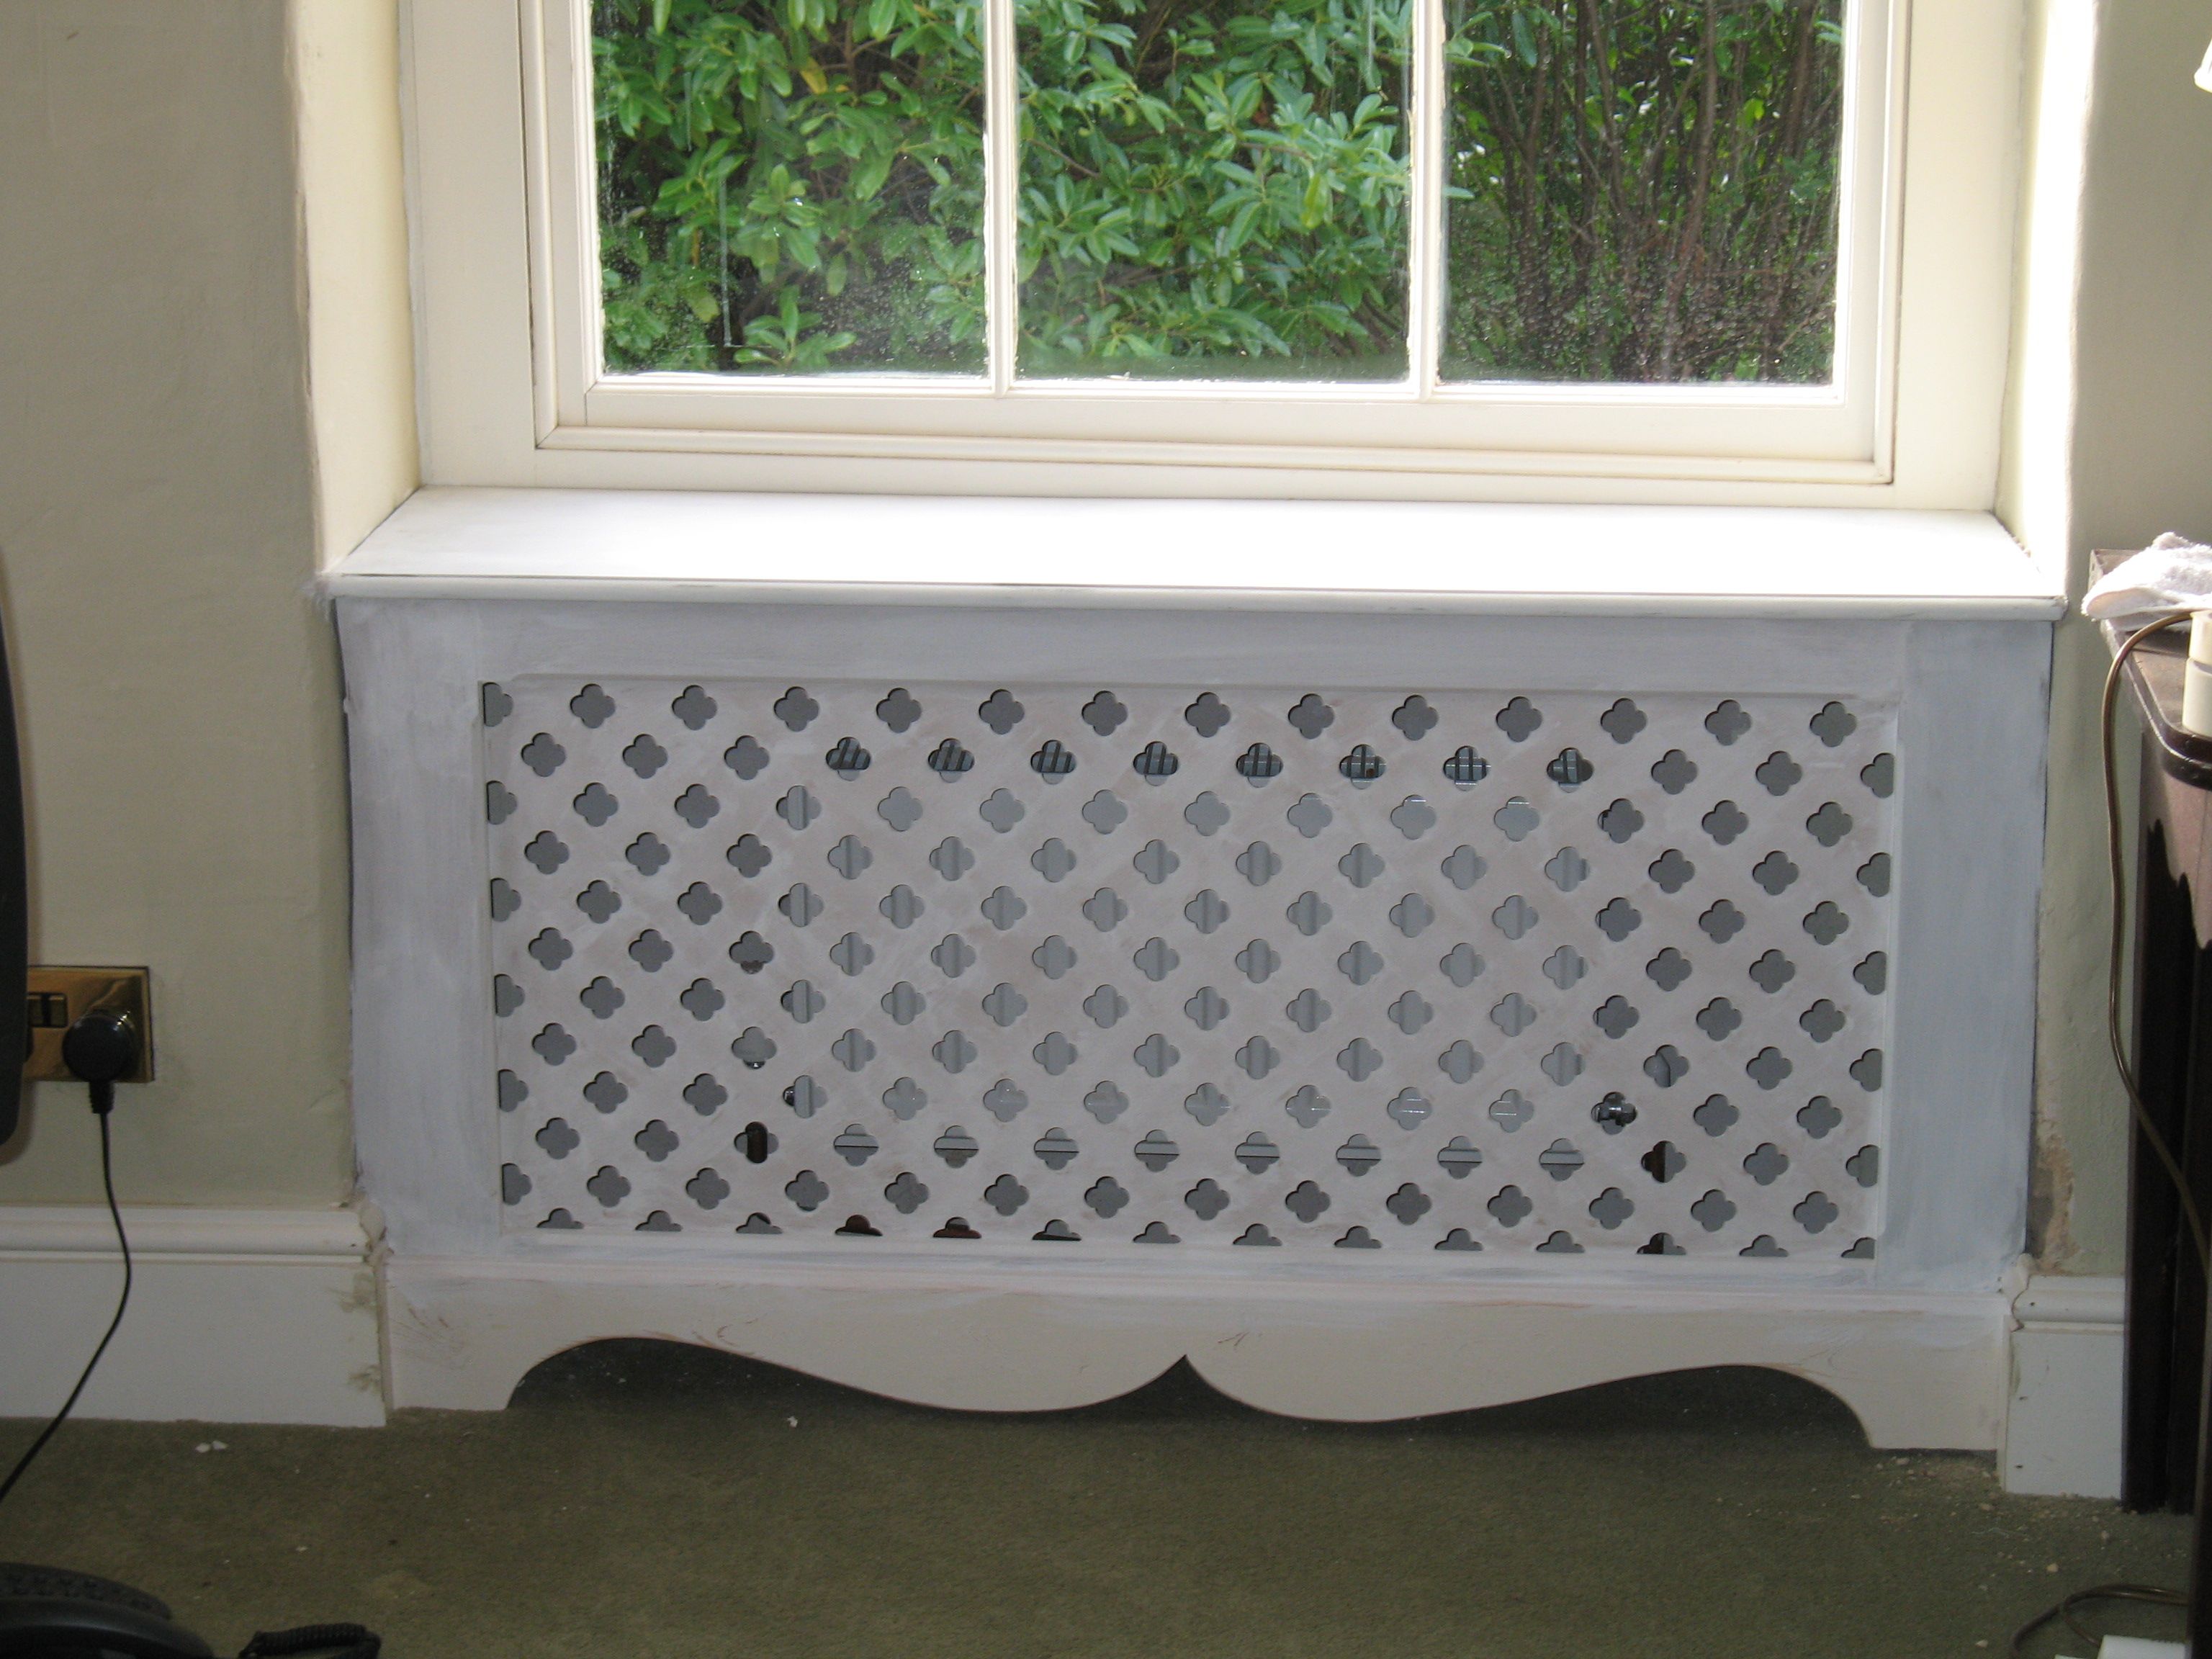 radiator cover ~ diy with an old dresser? | Repurposed and Hacked ...